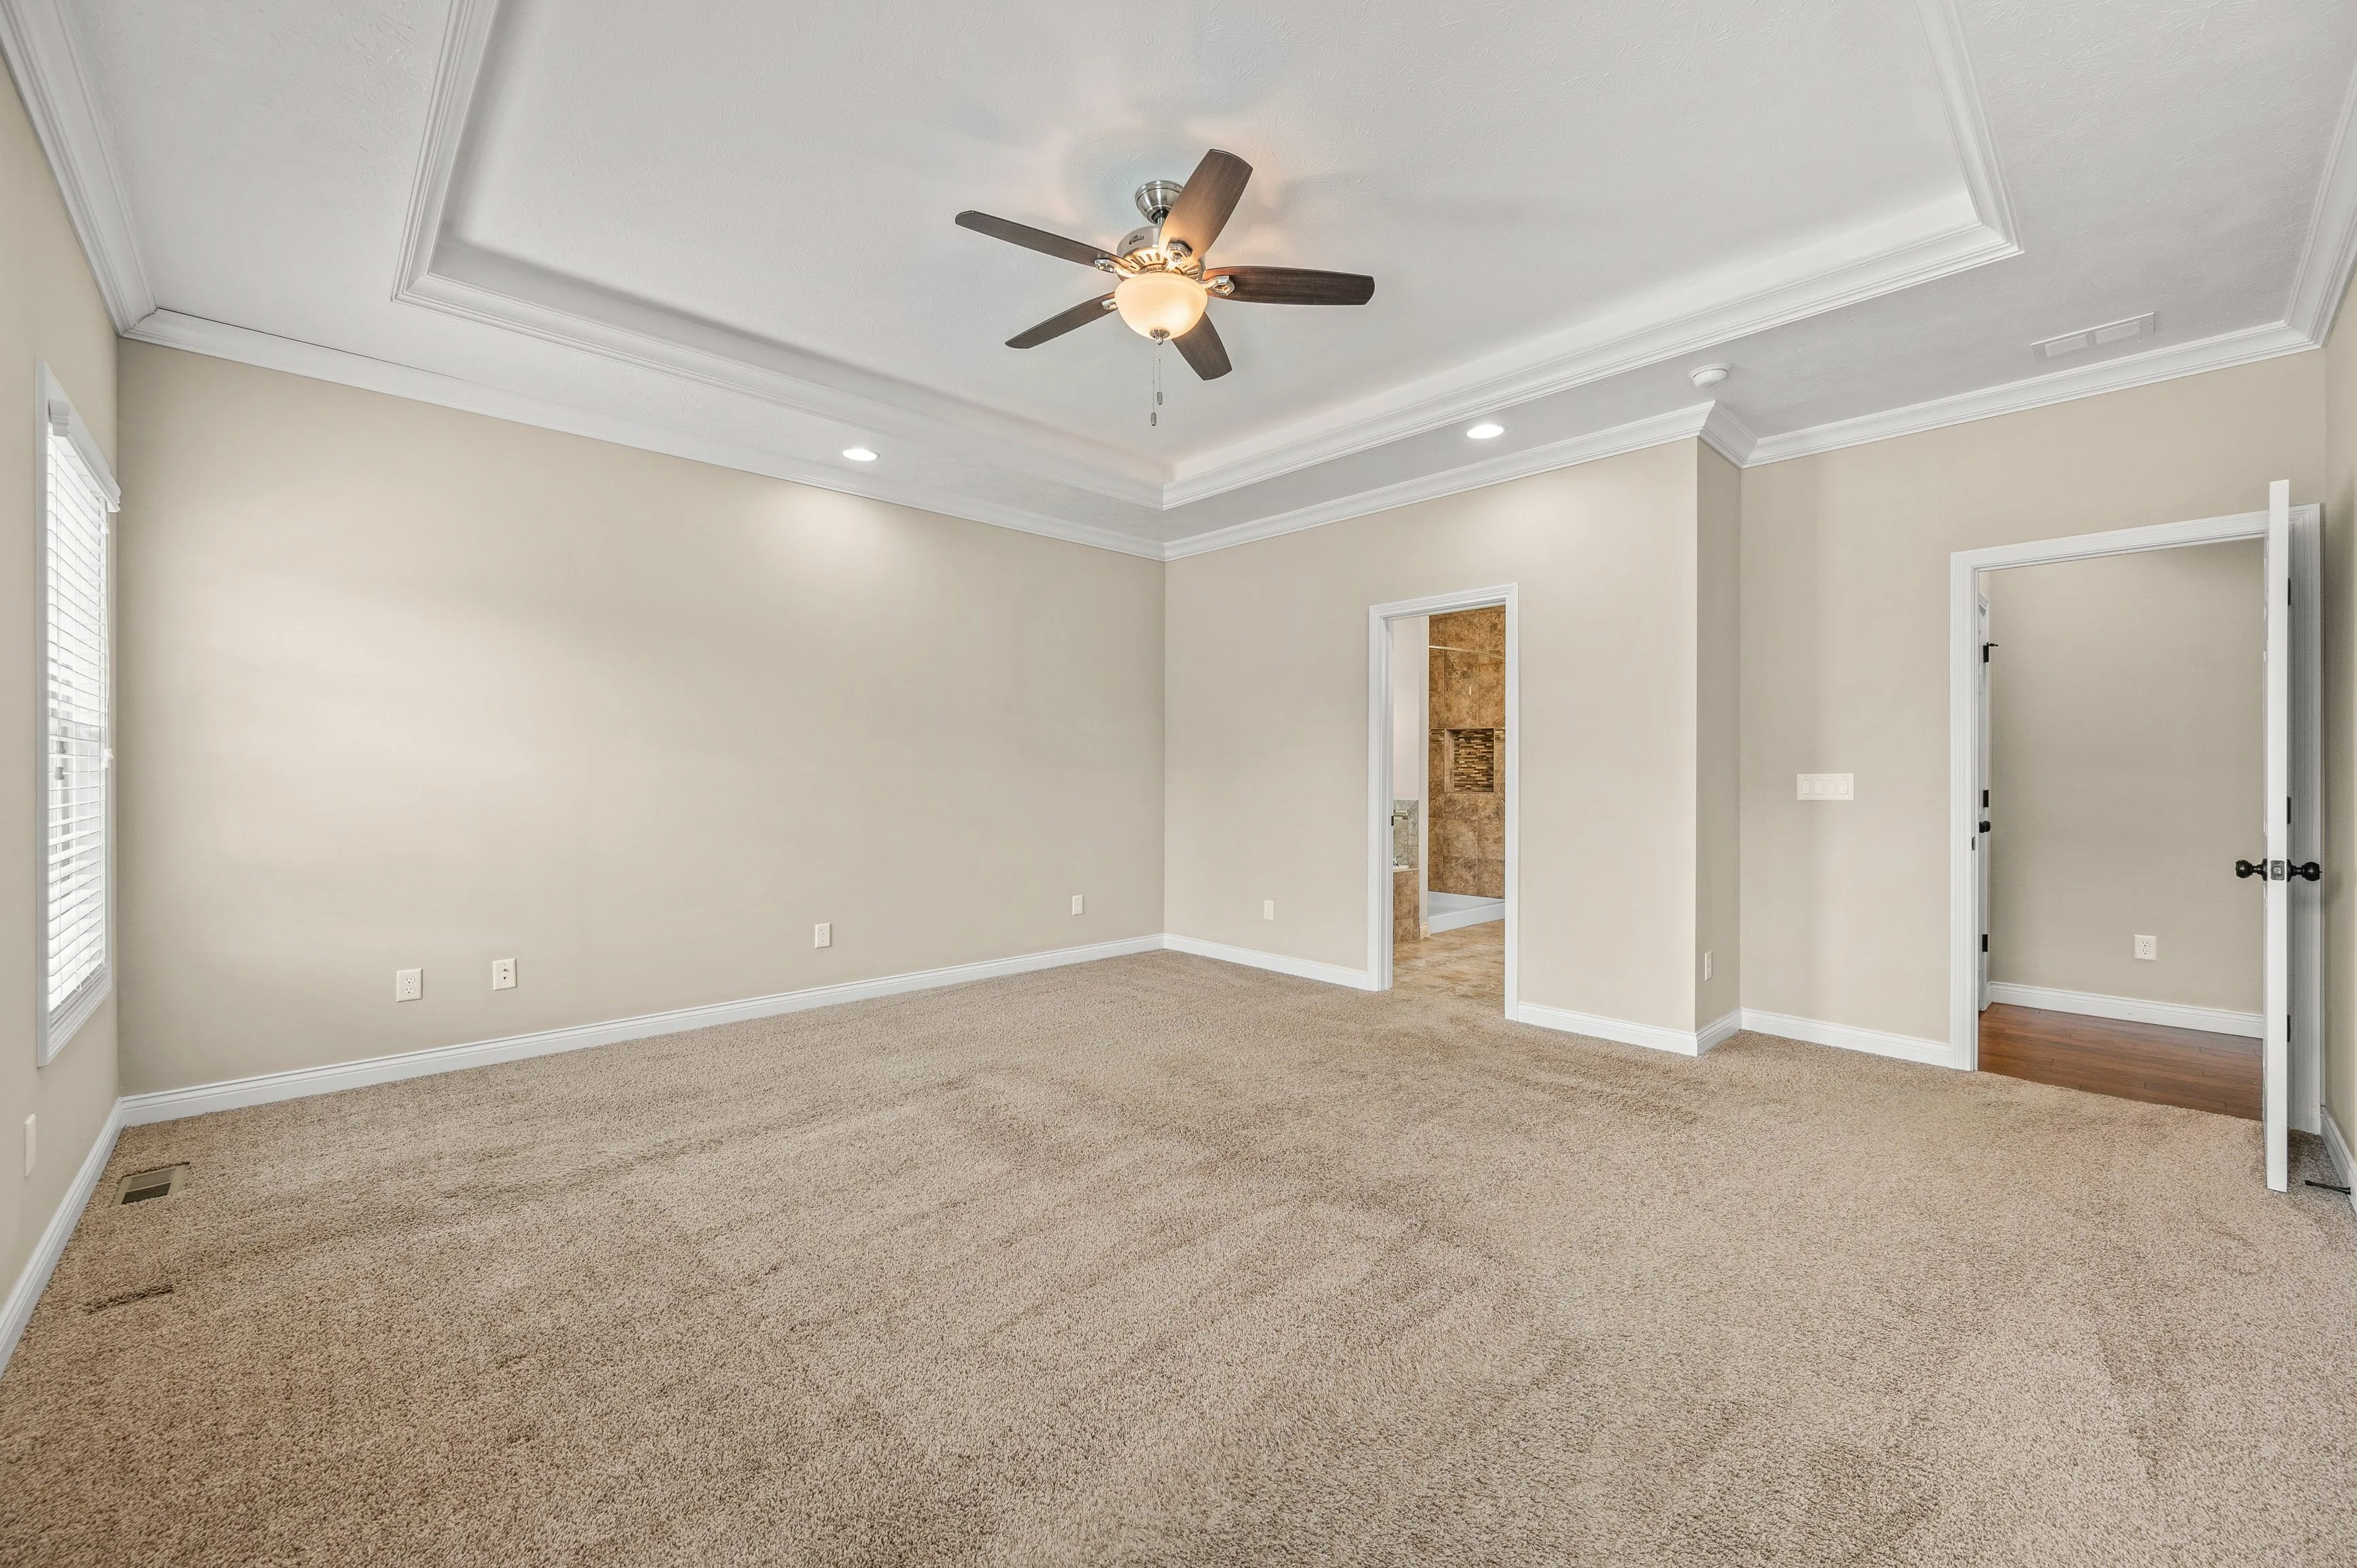 Empty room with beige walls, carpeted floor, ceiling fan, and open doors leading to adjacent rooms.